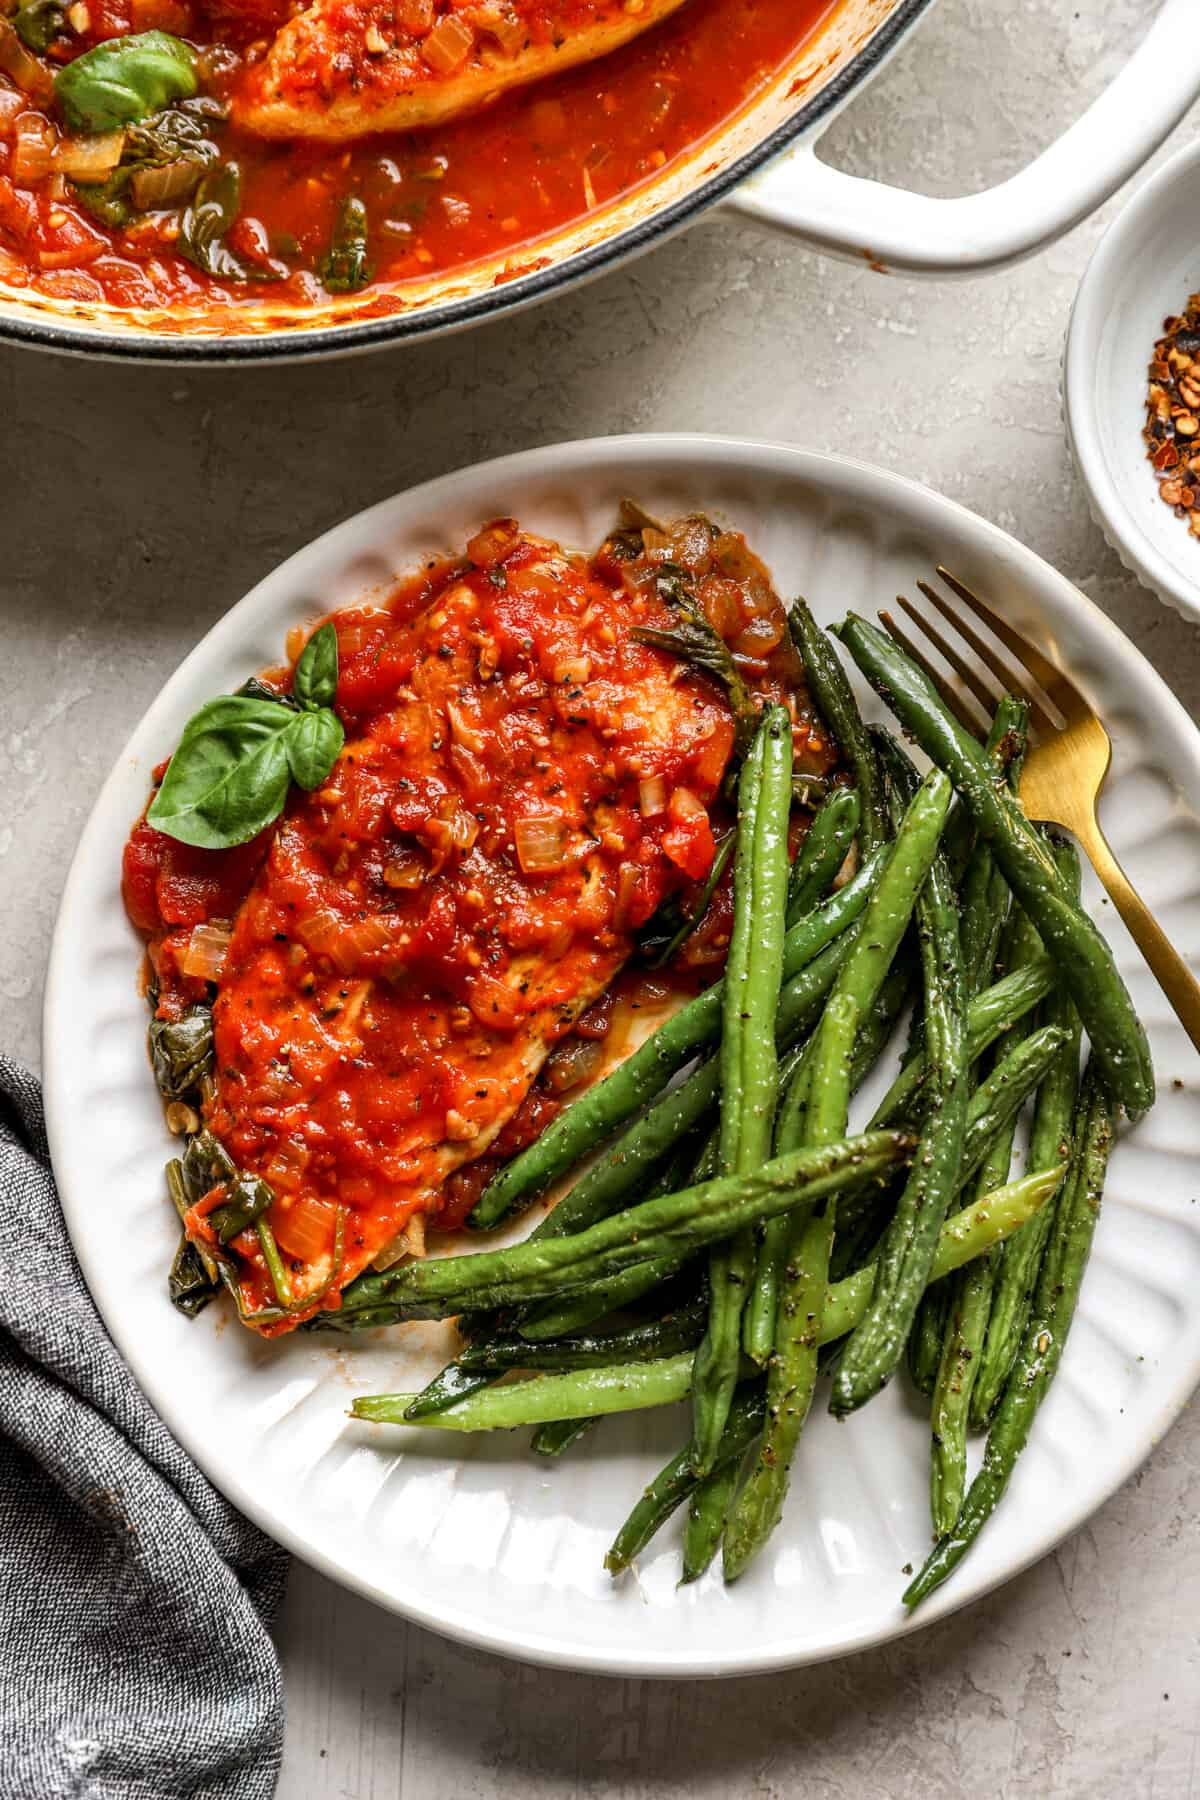 above image of a chicken cutlet with tomato sauce and green beans on a plate.